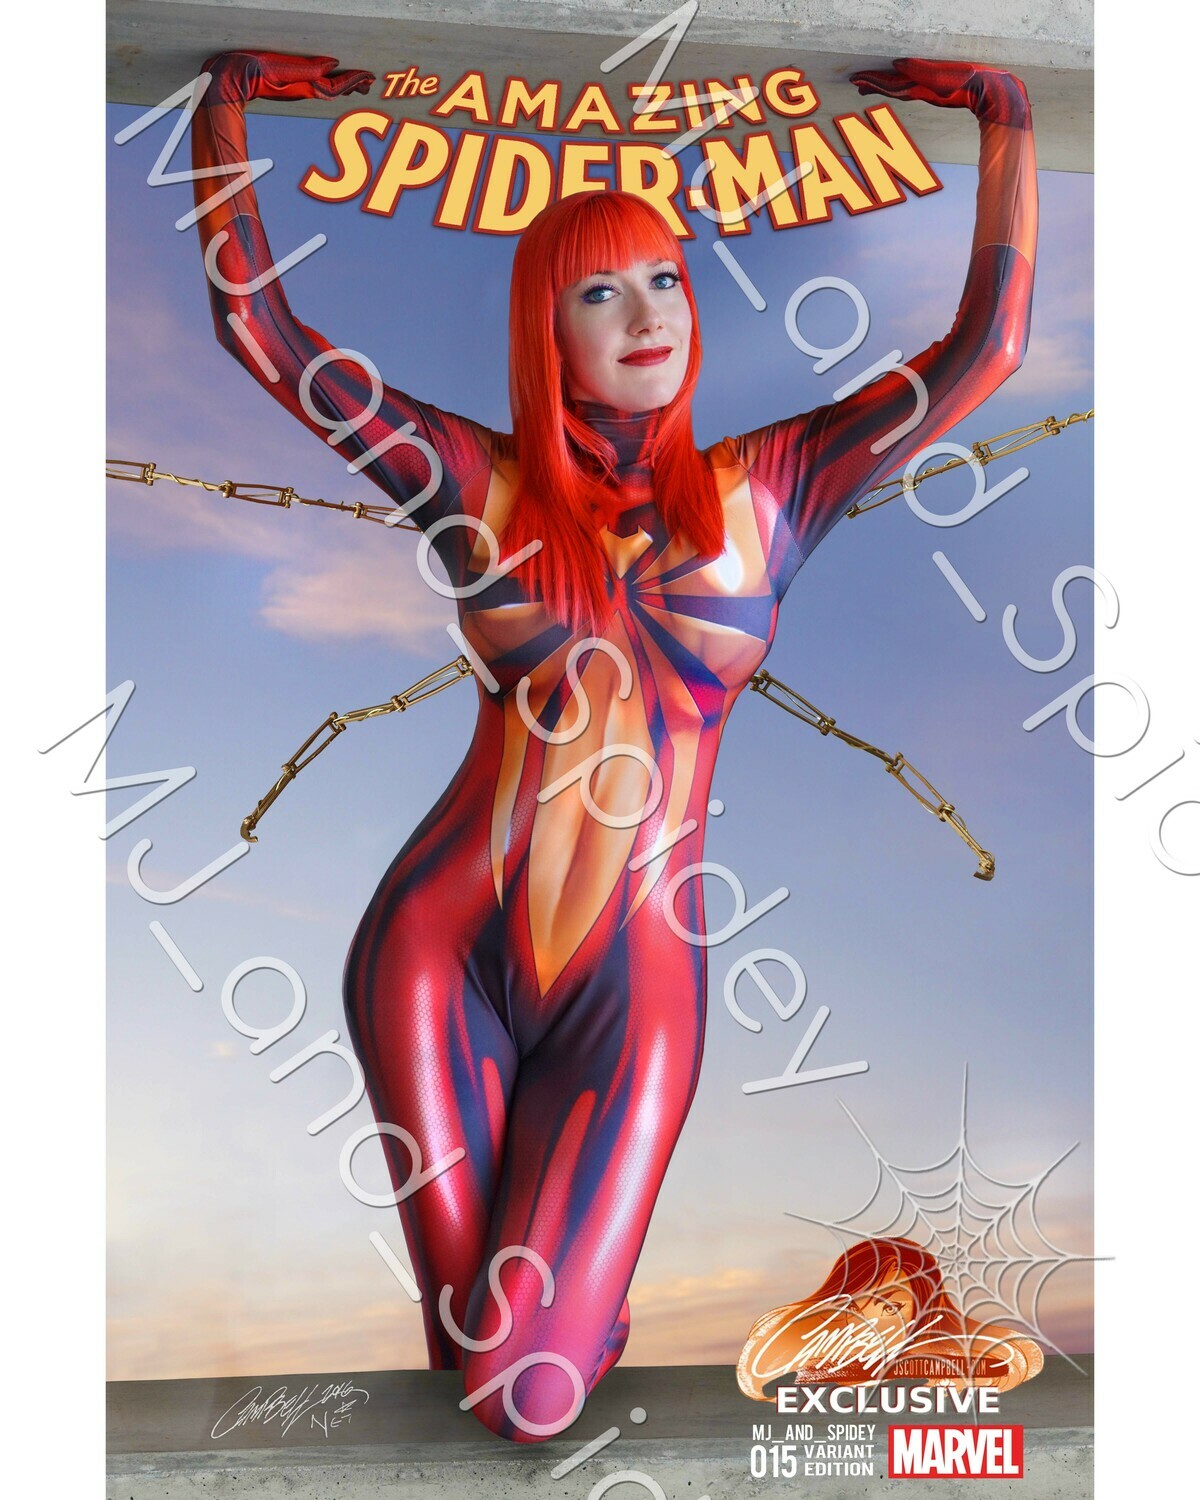 Marvel - Spider-Man - Mary Jane Watson - Iron Spider - Campbell 1 - Cosplay Print (@MJ_and_Spidey, MJ and Spidey, Comics)